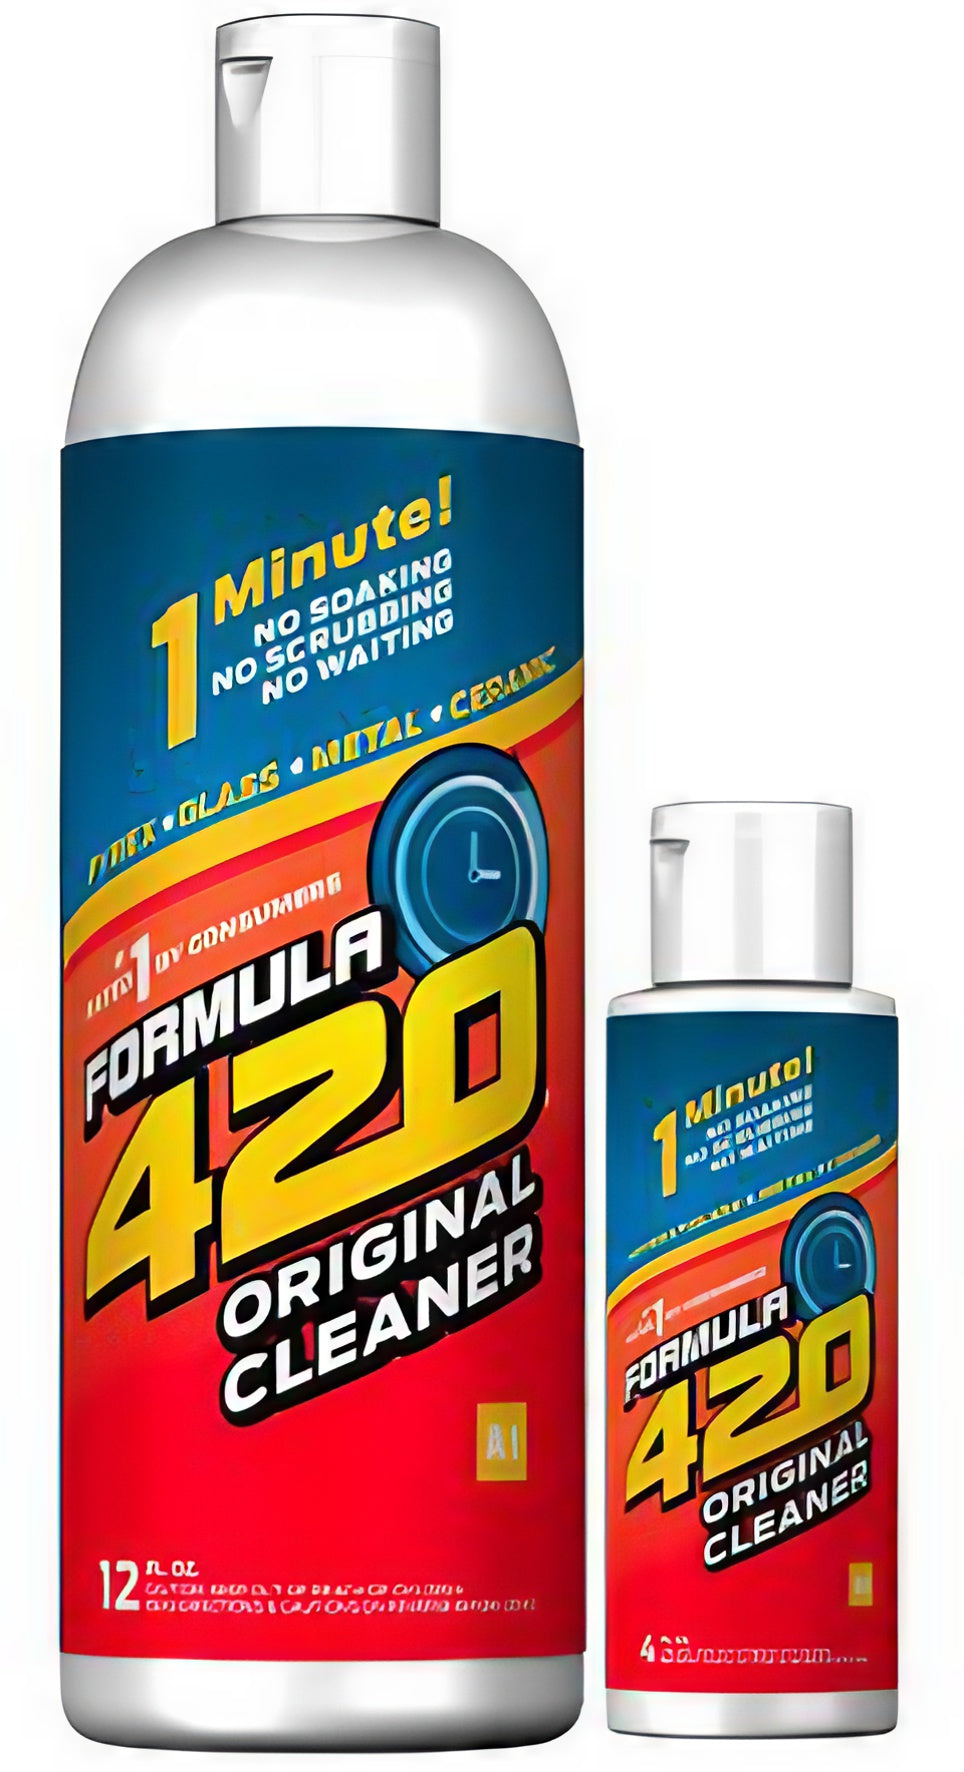 Formula 710 Advanced Cleaner Safe on Pyrex Glass Metal and Ceramic by Formula 420 - Assorted Sizes (16oz - Large)